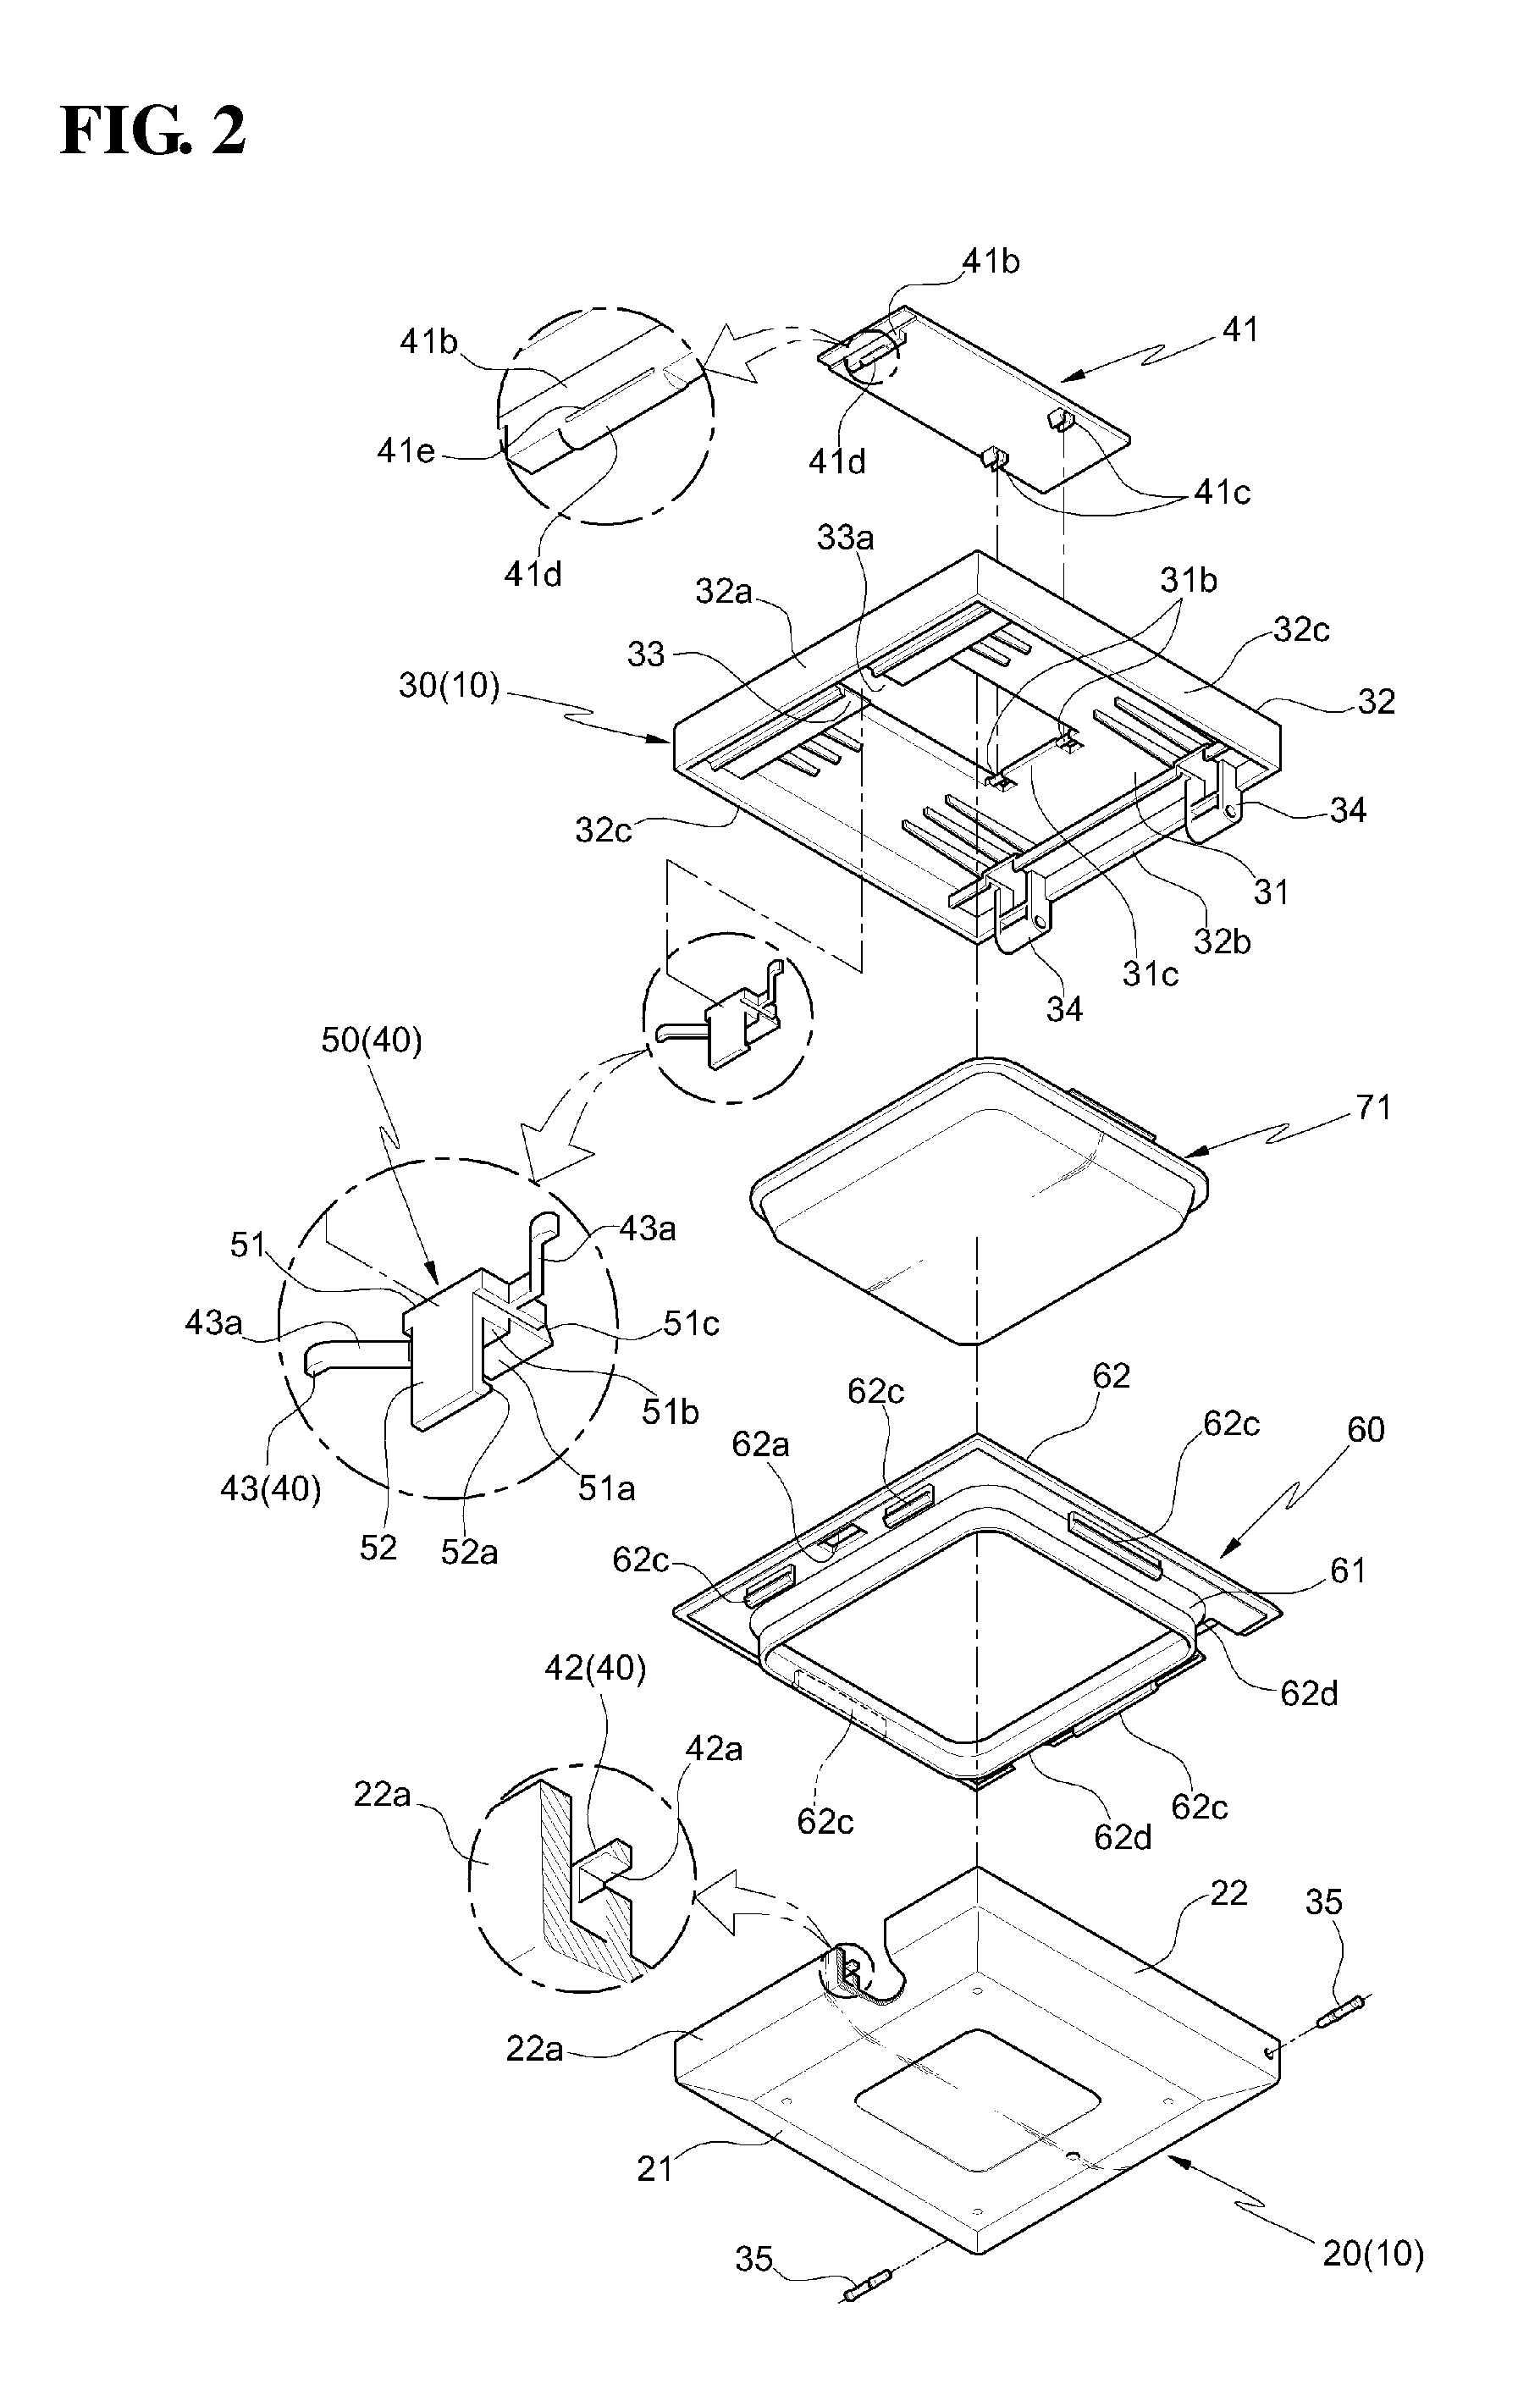 Clam shell type receptacle